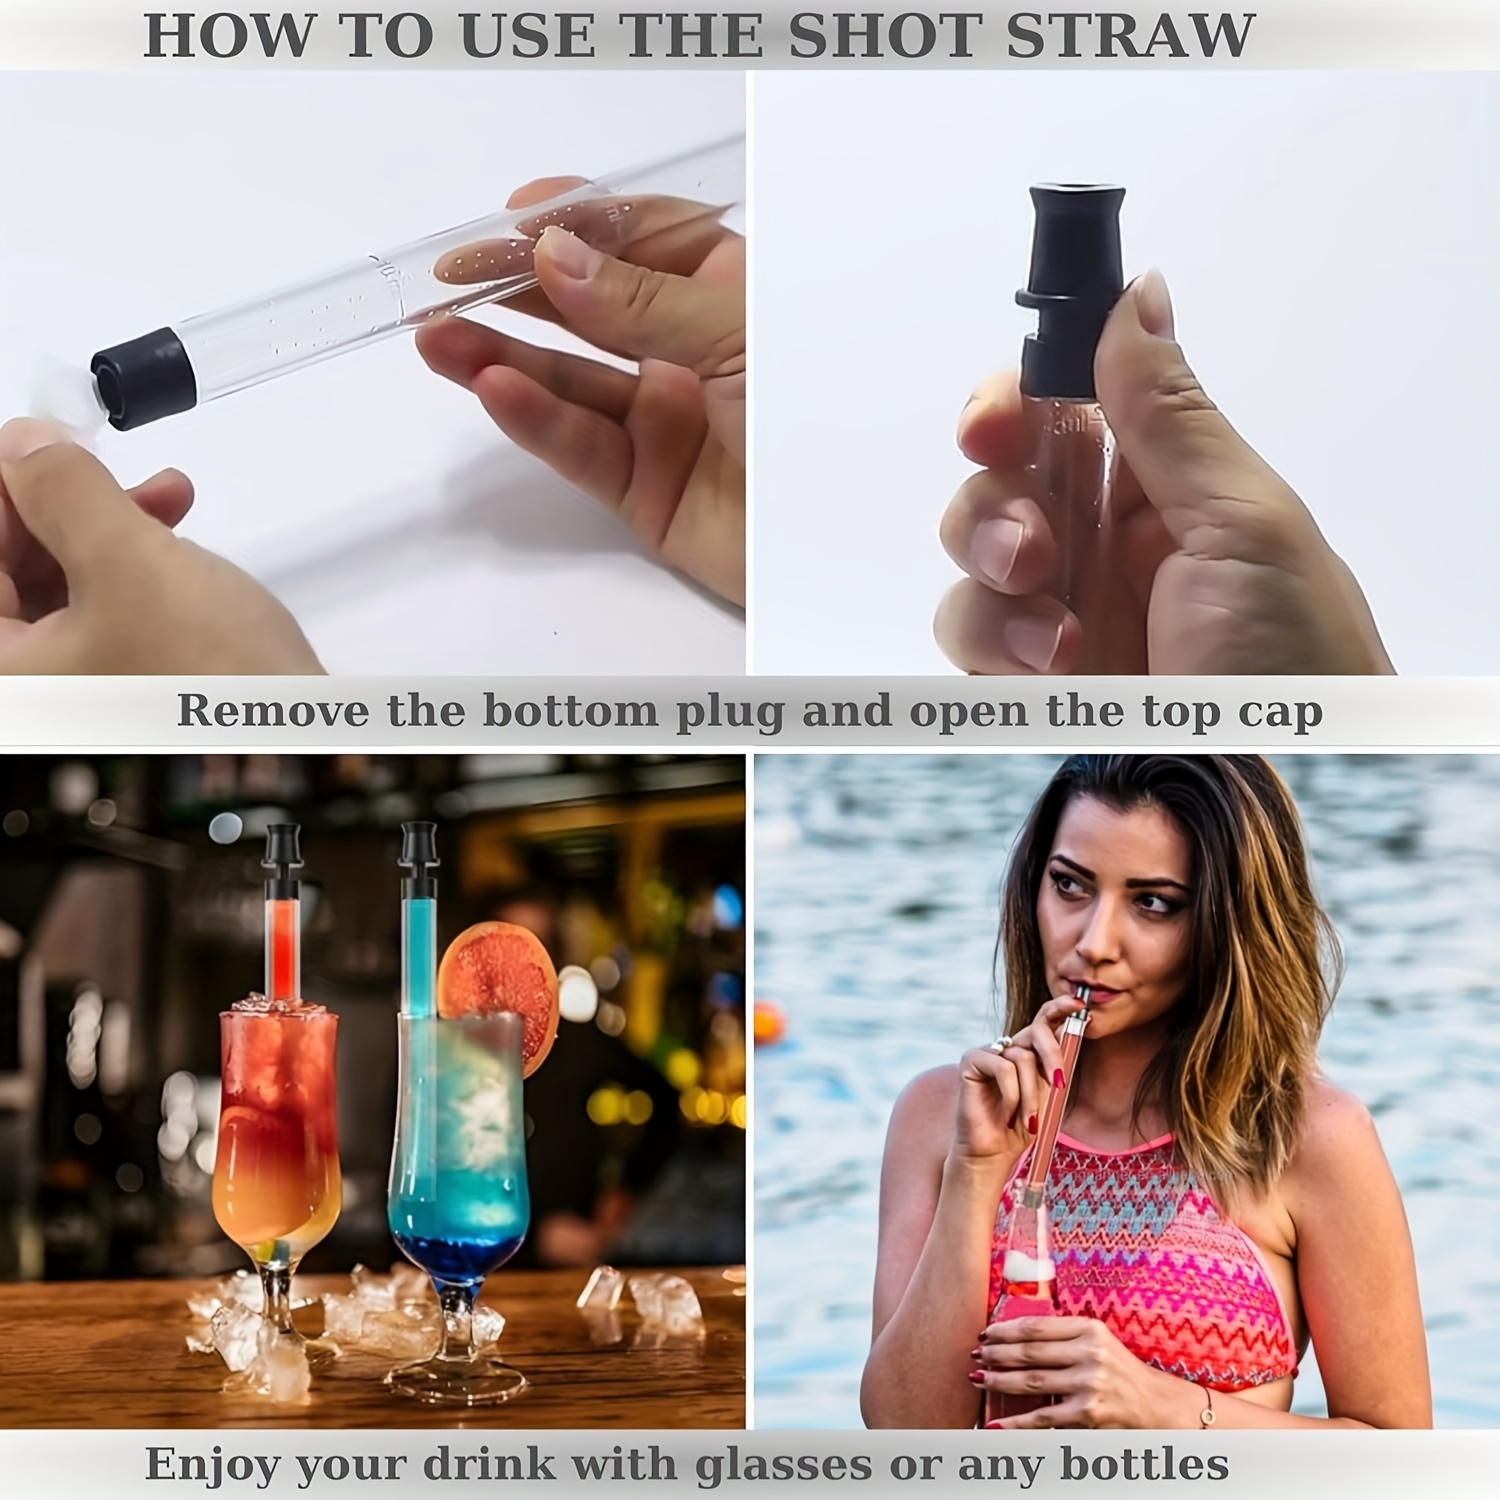 TakeShots Take - Shot Holder & Straw for Drinks & Chasers